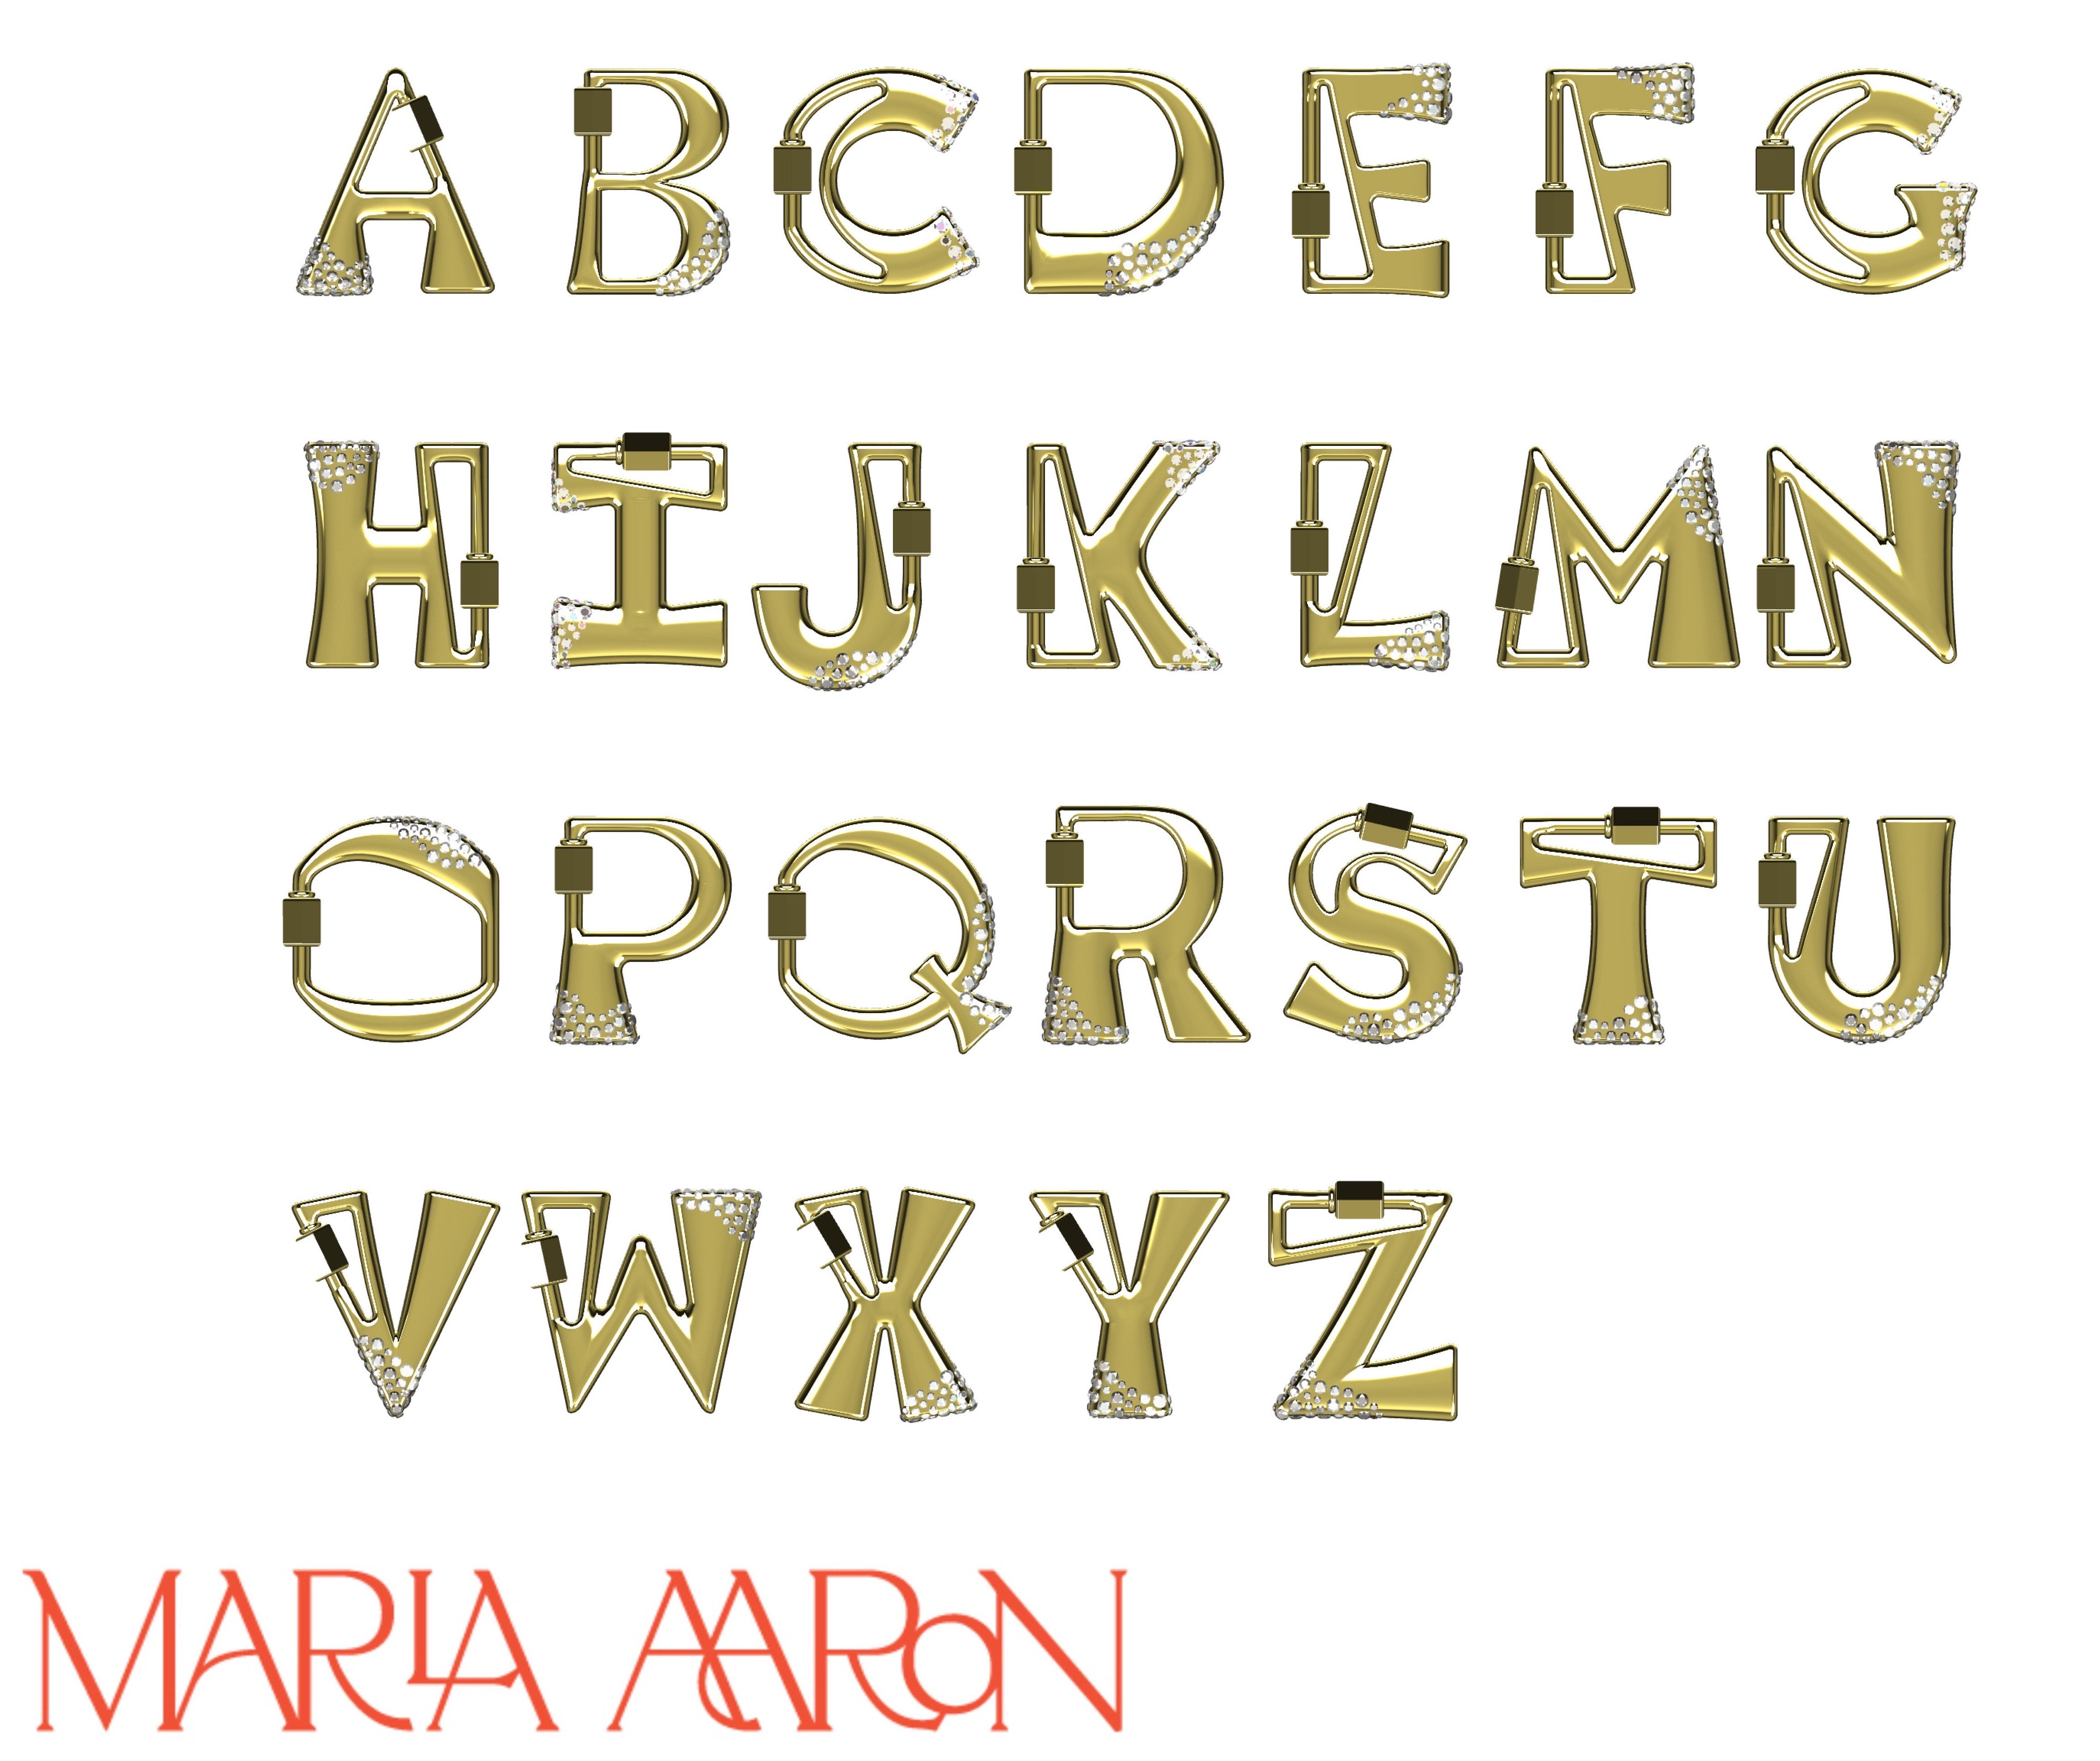 Gold locks of every letter of the alphabet including H charm against white backdrop with Marla Aaron logo in bottom left corner